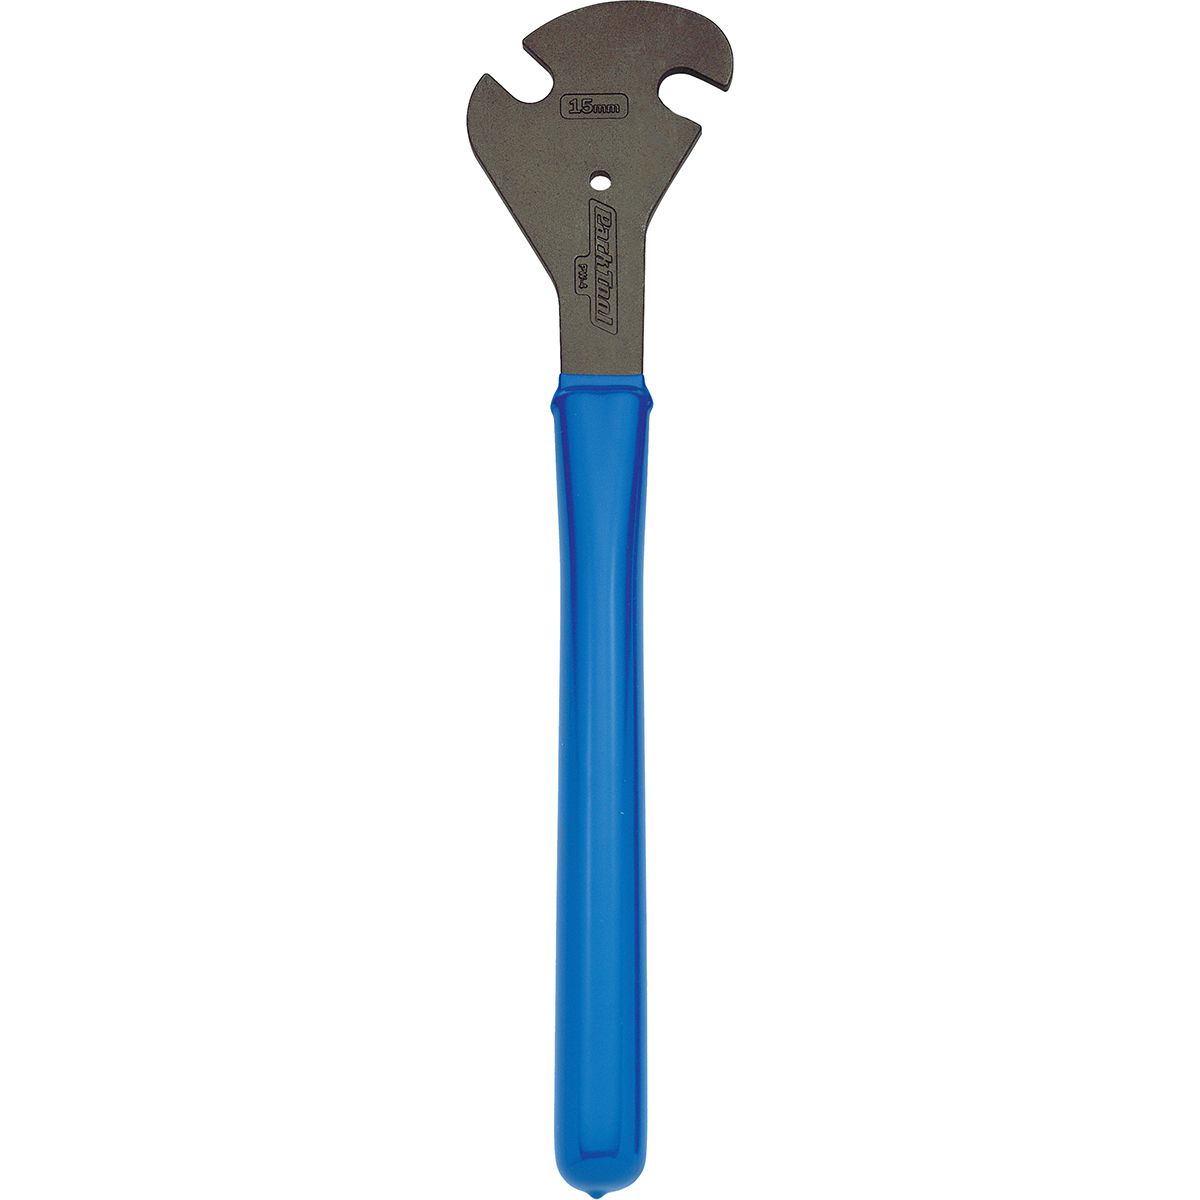 Park Tool PW-4 Professional Pedal Wrench One Color, One Size